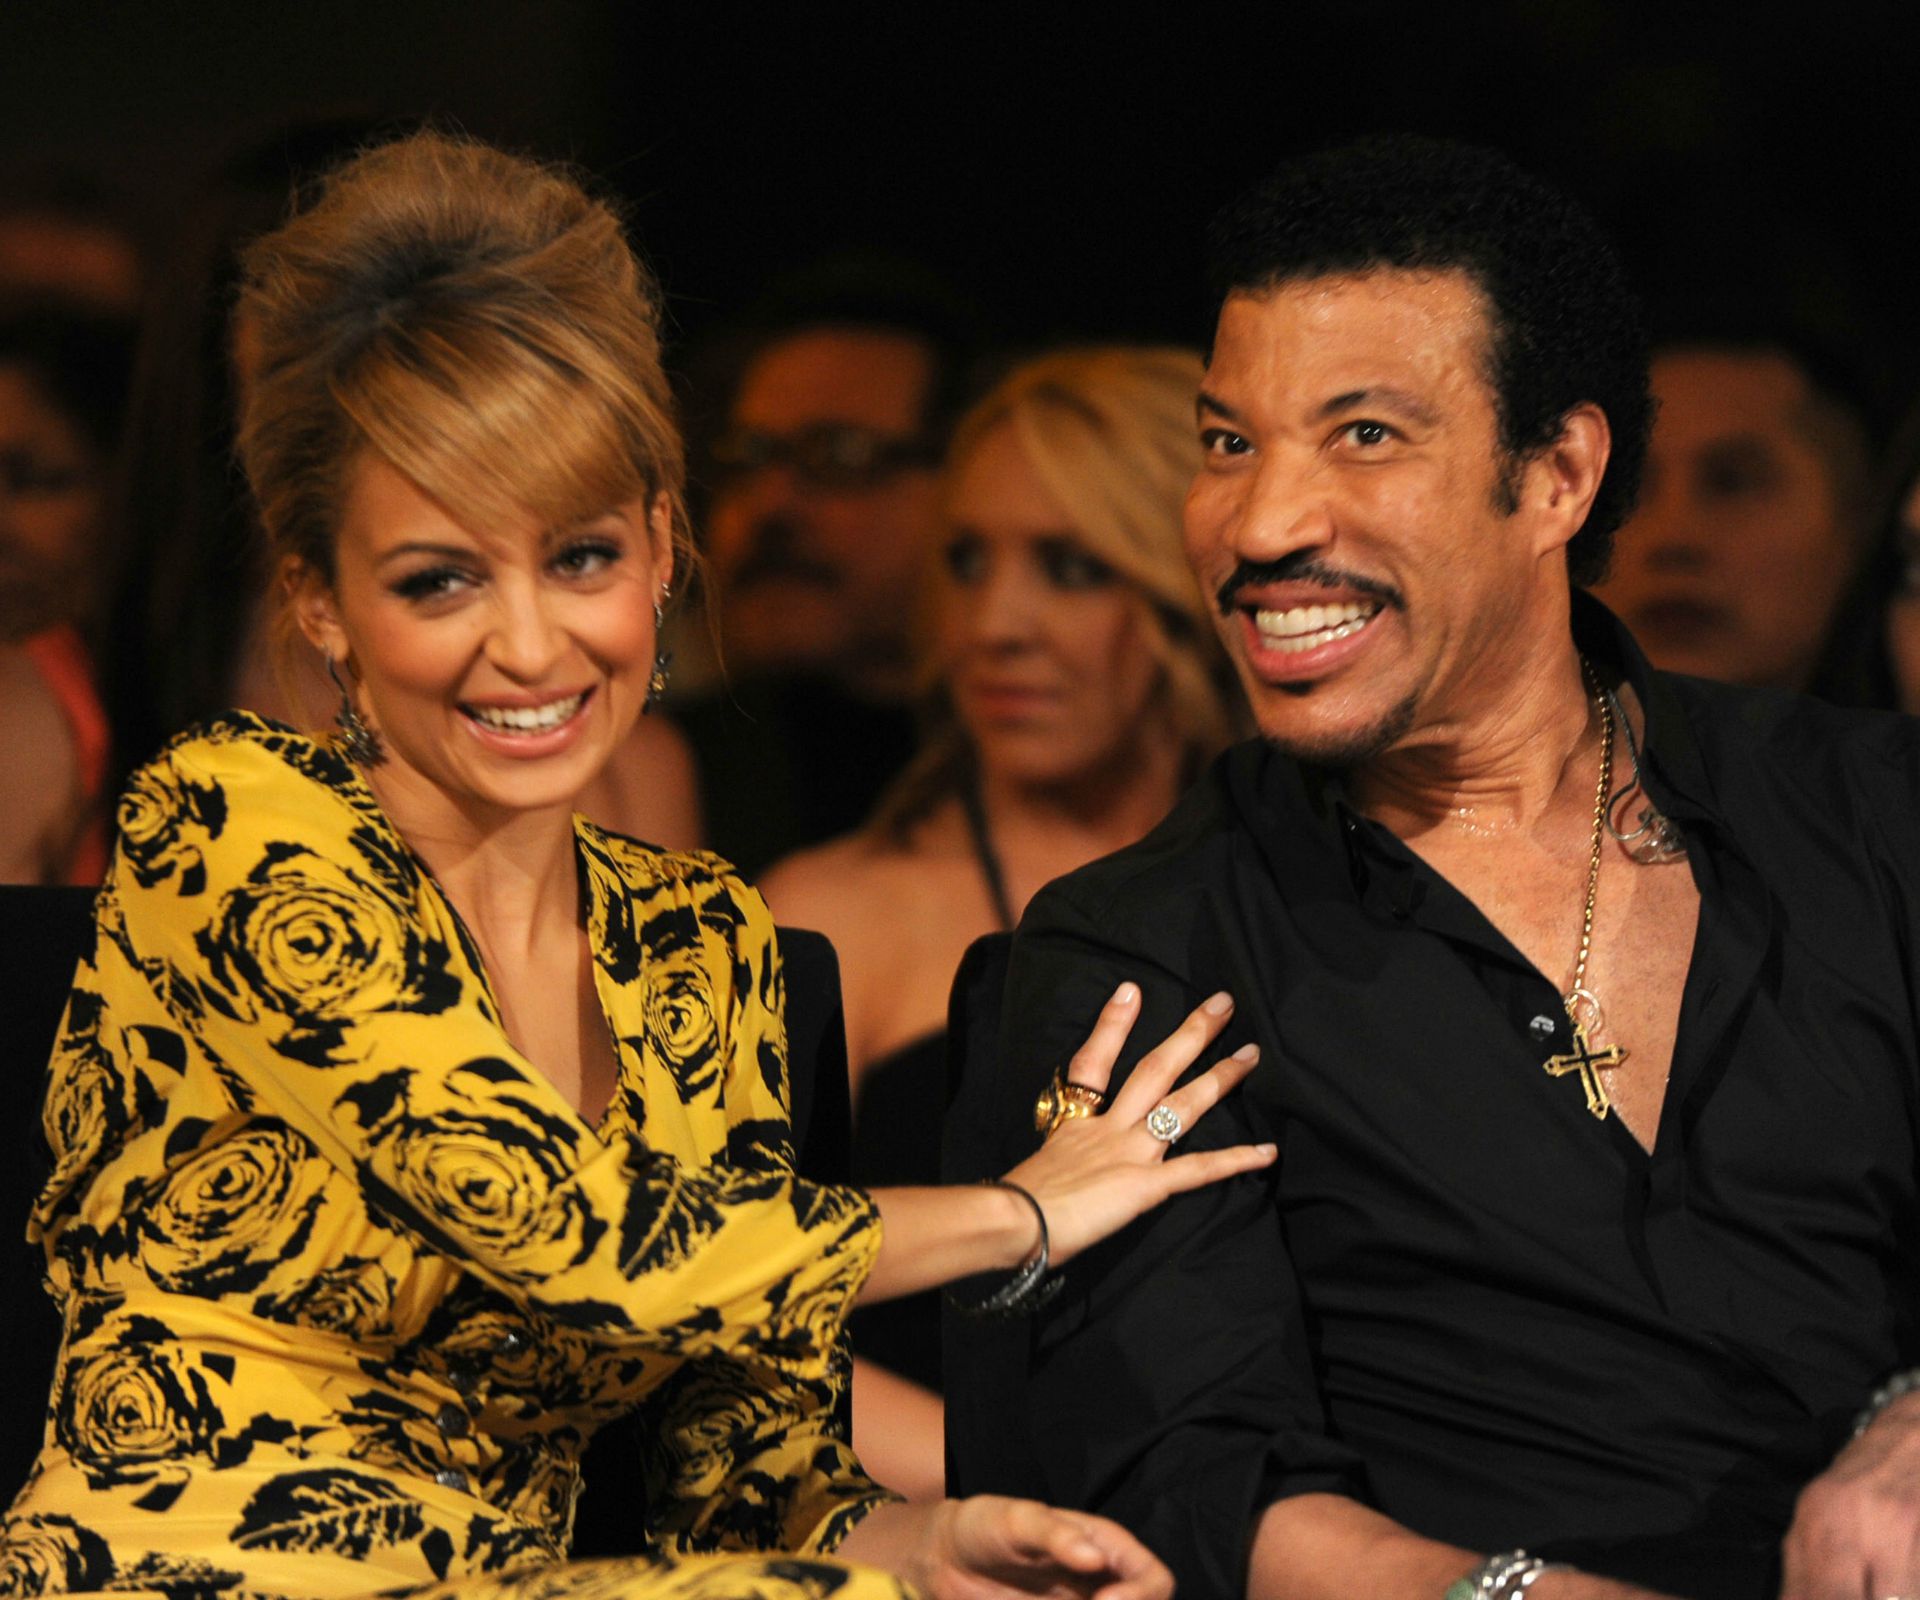 Lionel Richie opens up about adopting daughter Nicole